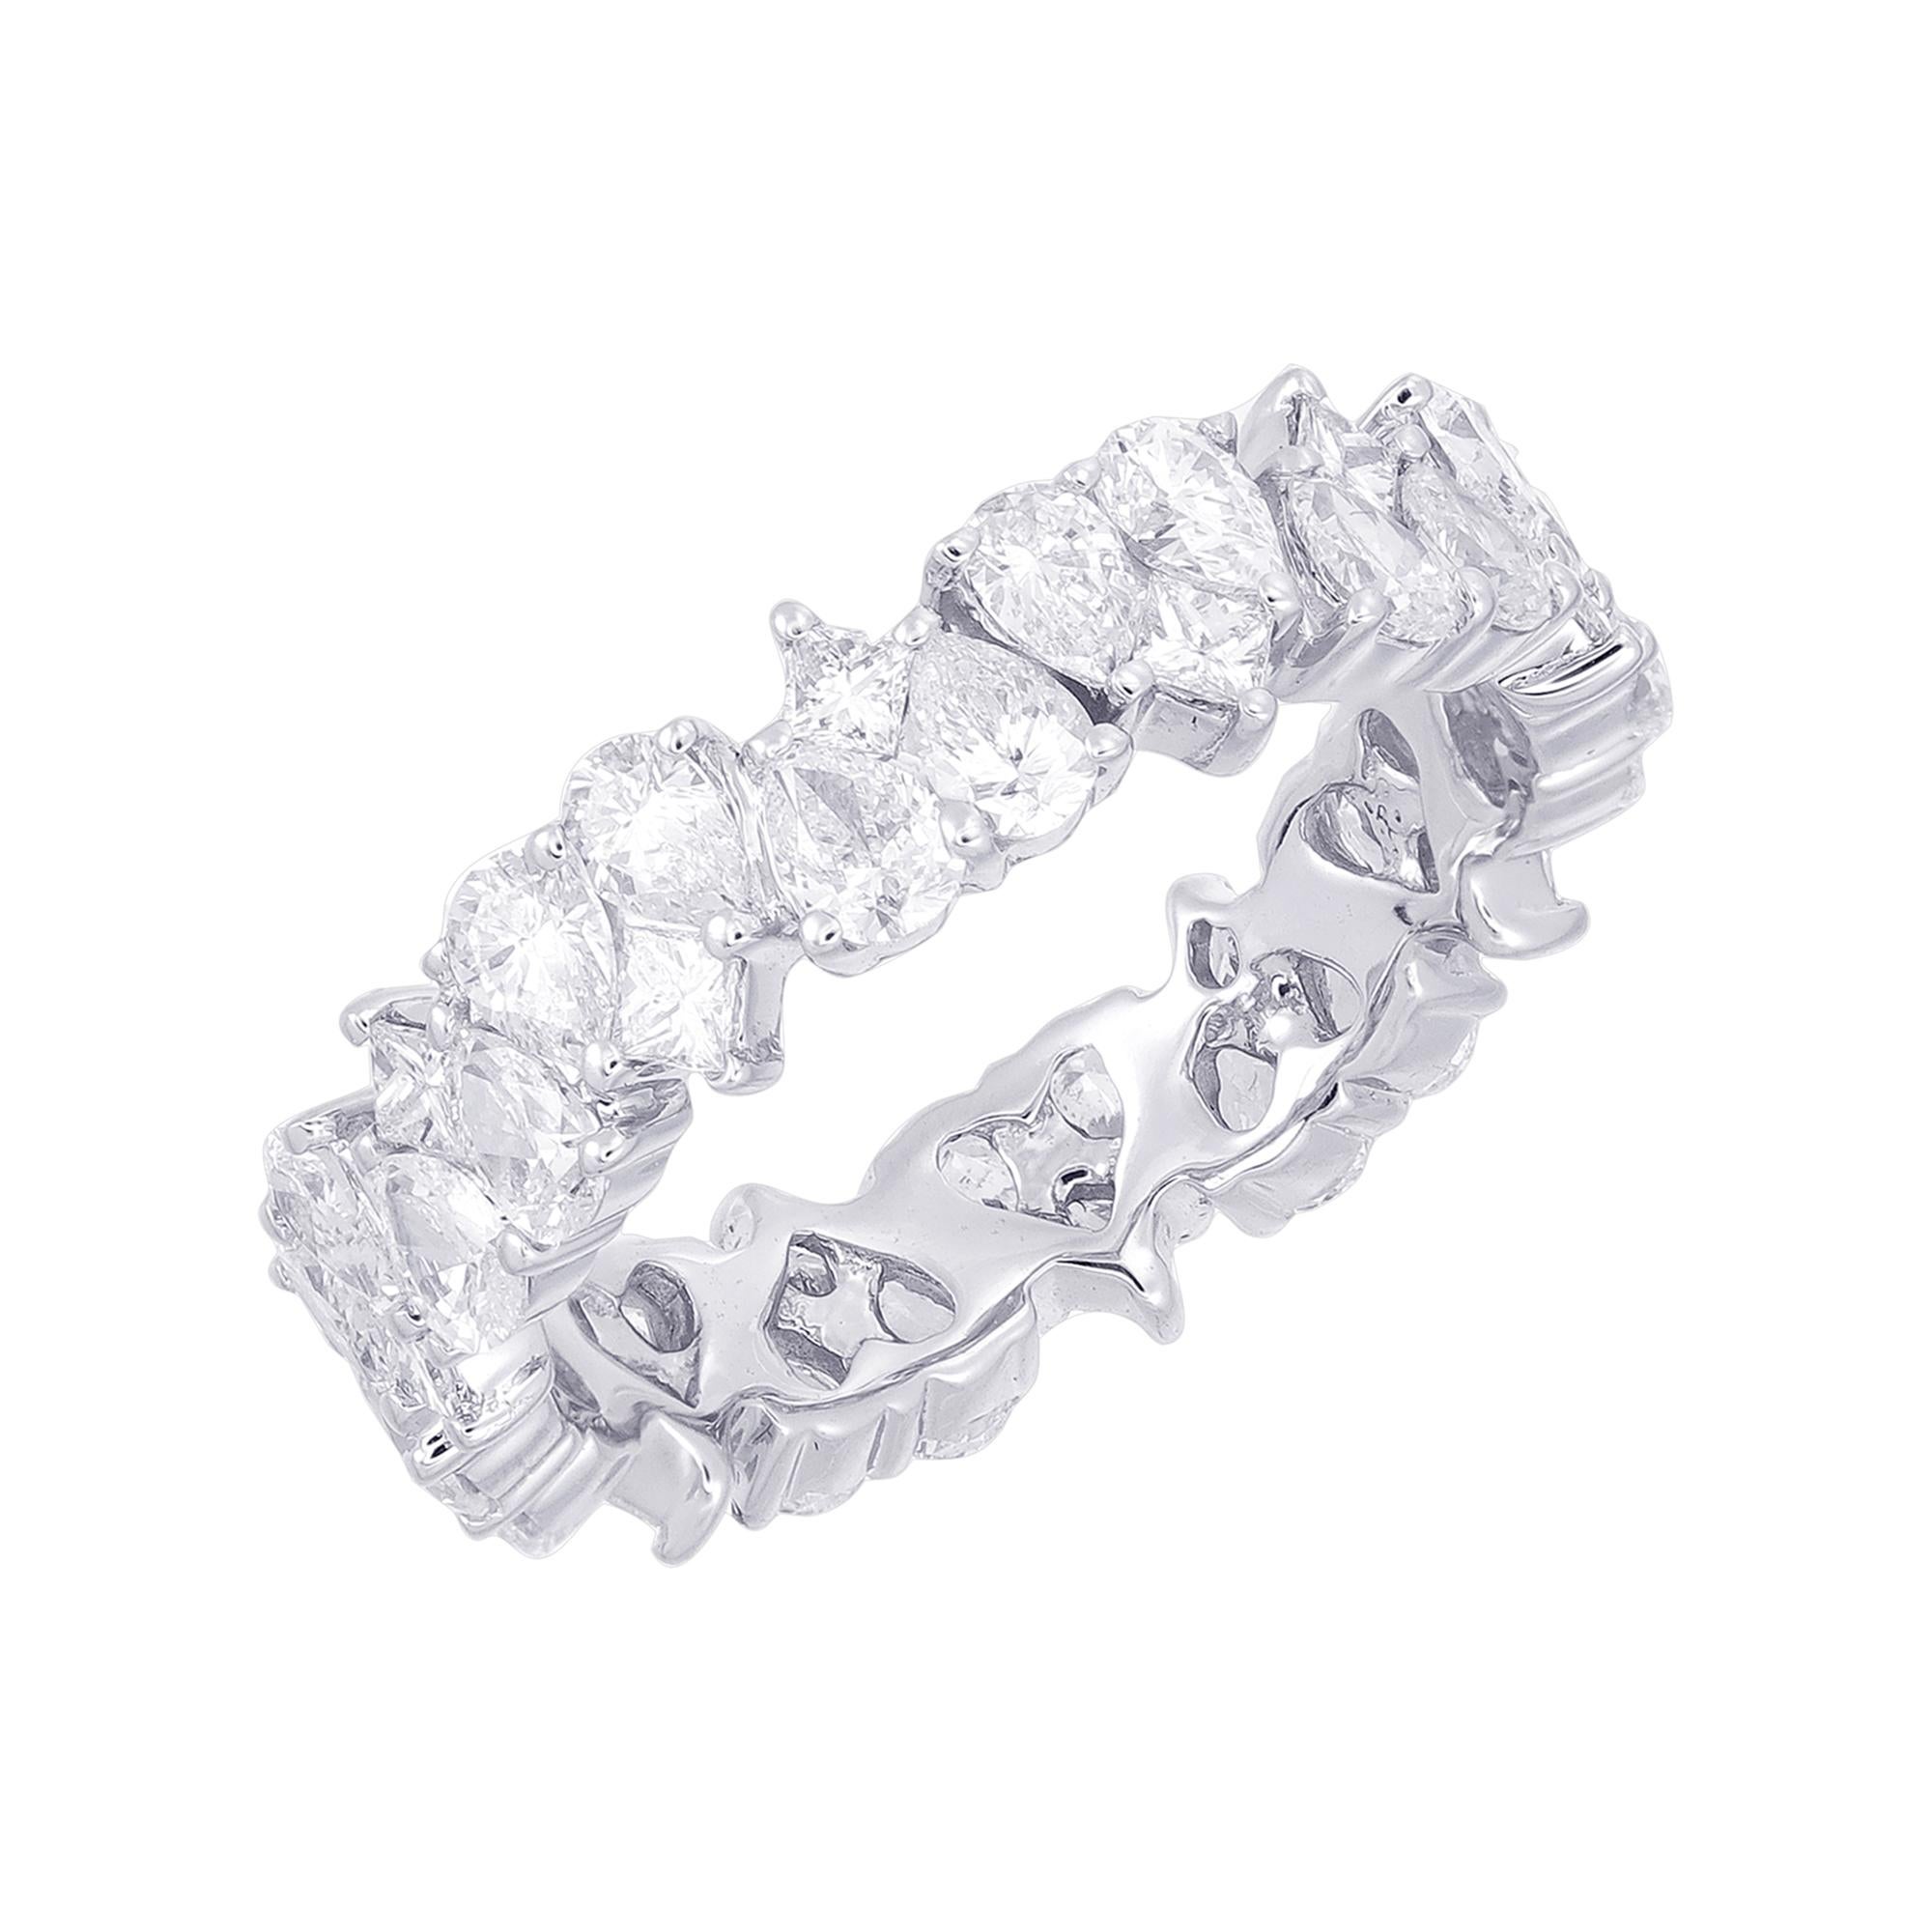 This exquisite and extremely unusual diamond eternity band is crafted in 18k white gold. It is a continuous circle of Heart shape diamond Illusion weighing band approx. 2.86 carats. It can be showcased as the perfect wedding ring or diamond